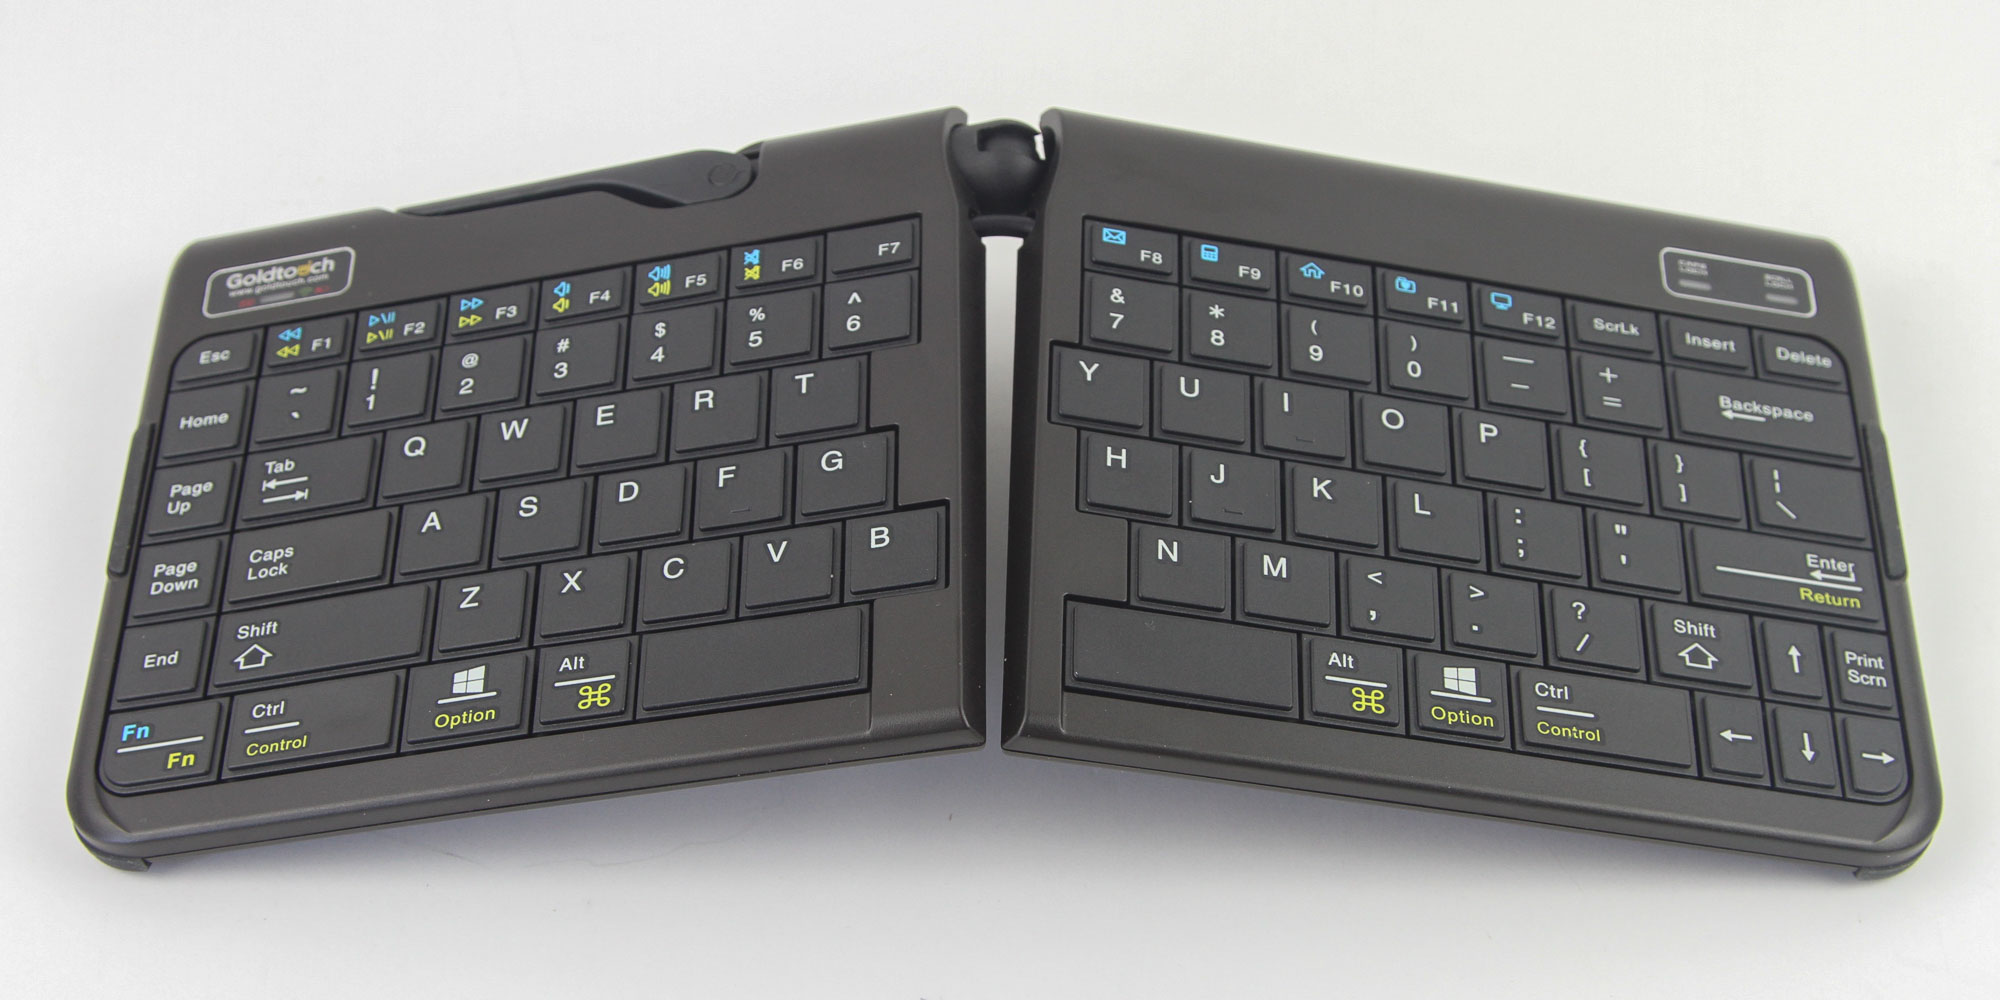 Goldtouch Go!2 Bluetooth Wireless Mobile Keyboard Review - Closer ...